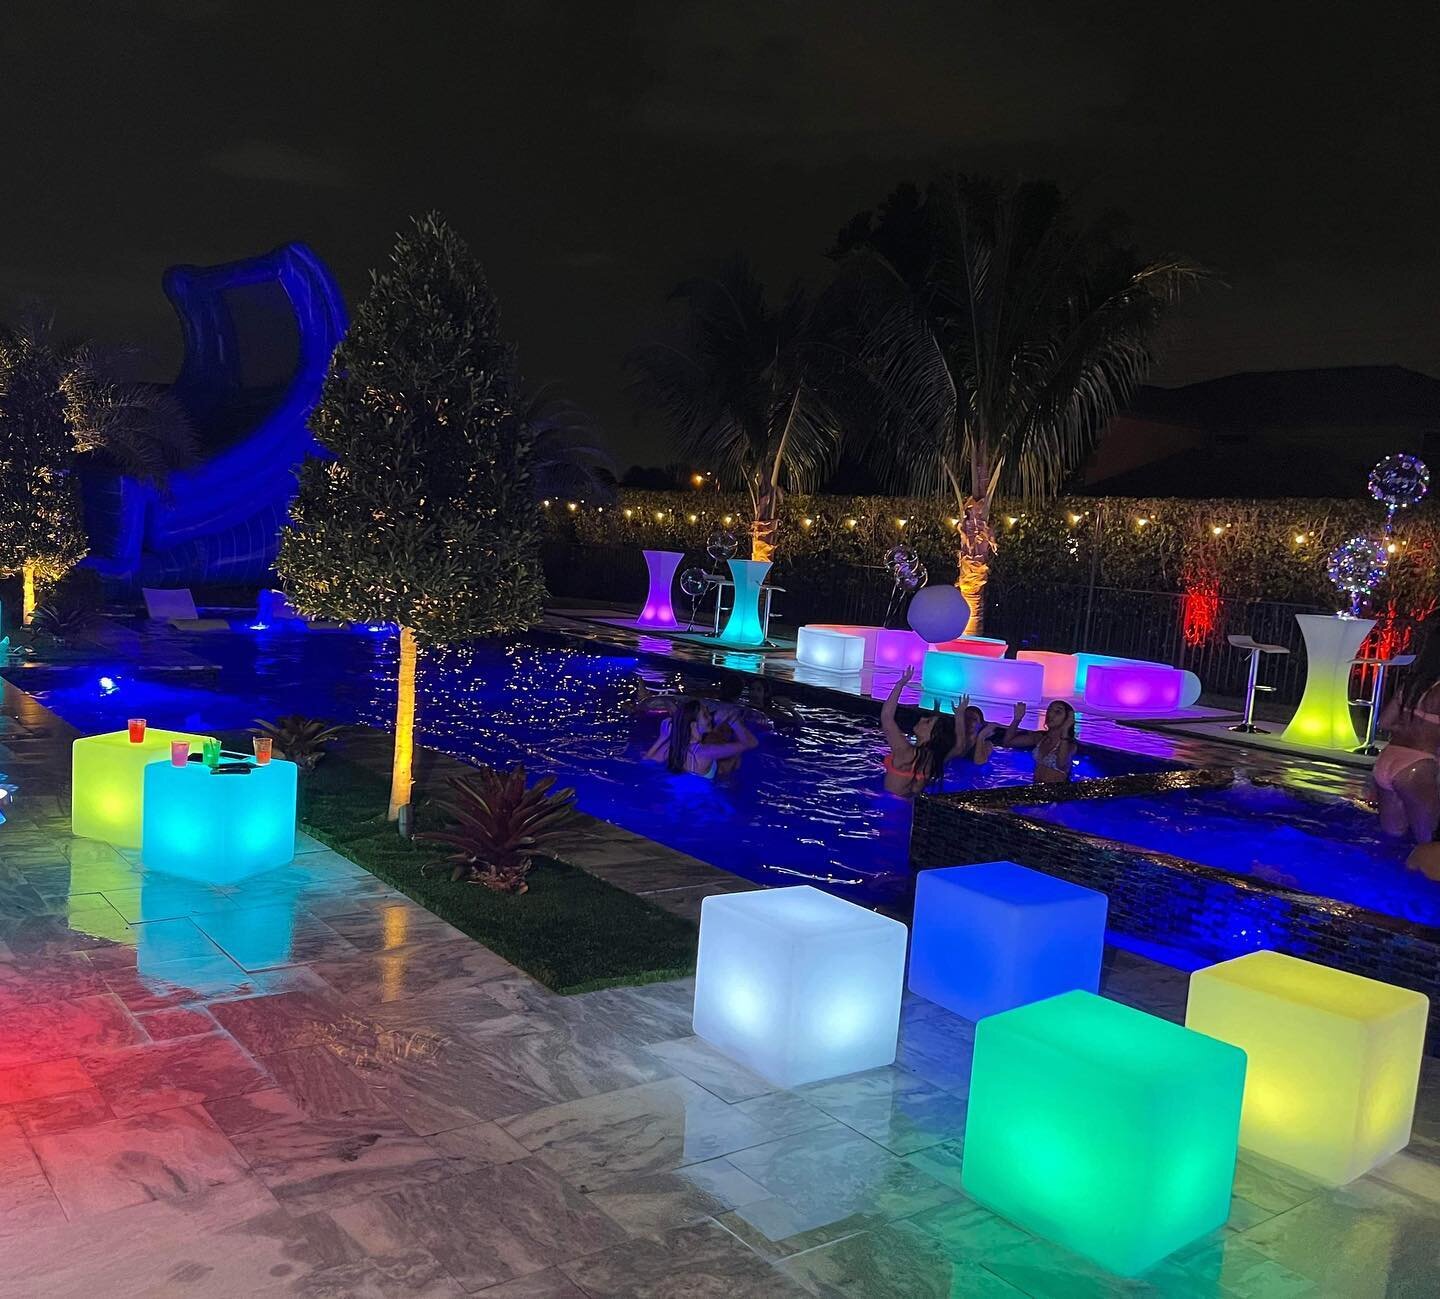 Make your party glow with our elegant furniture. Reach out to @goodvibespartyrentals to elevate your event. GLOW BABY GLOW!

#southfloridaplanner #westpalmbeachparty #bocaraton #bocaratonparty #delraybeach #delraybeachparty #floridapoolparty #florida